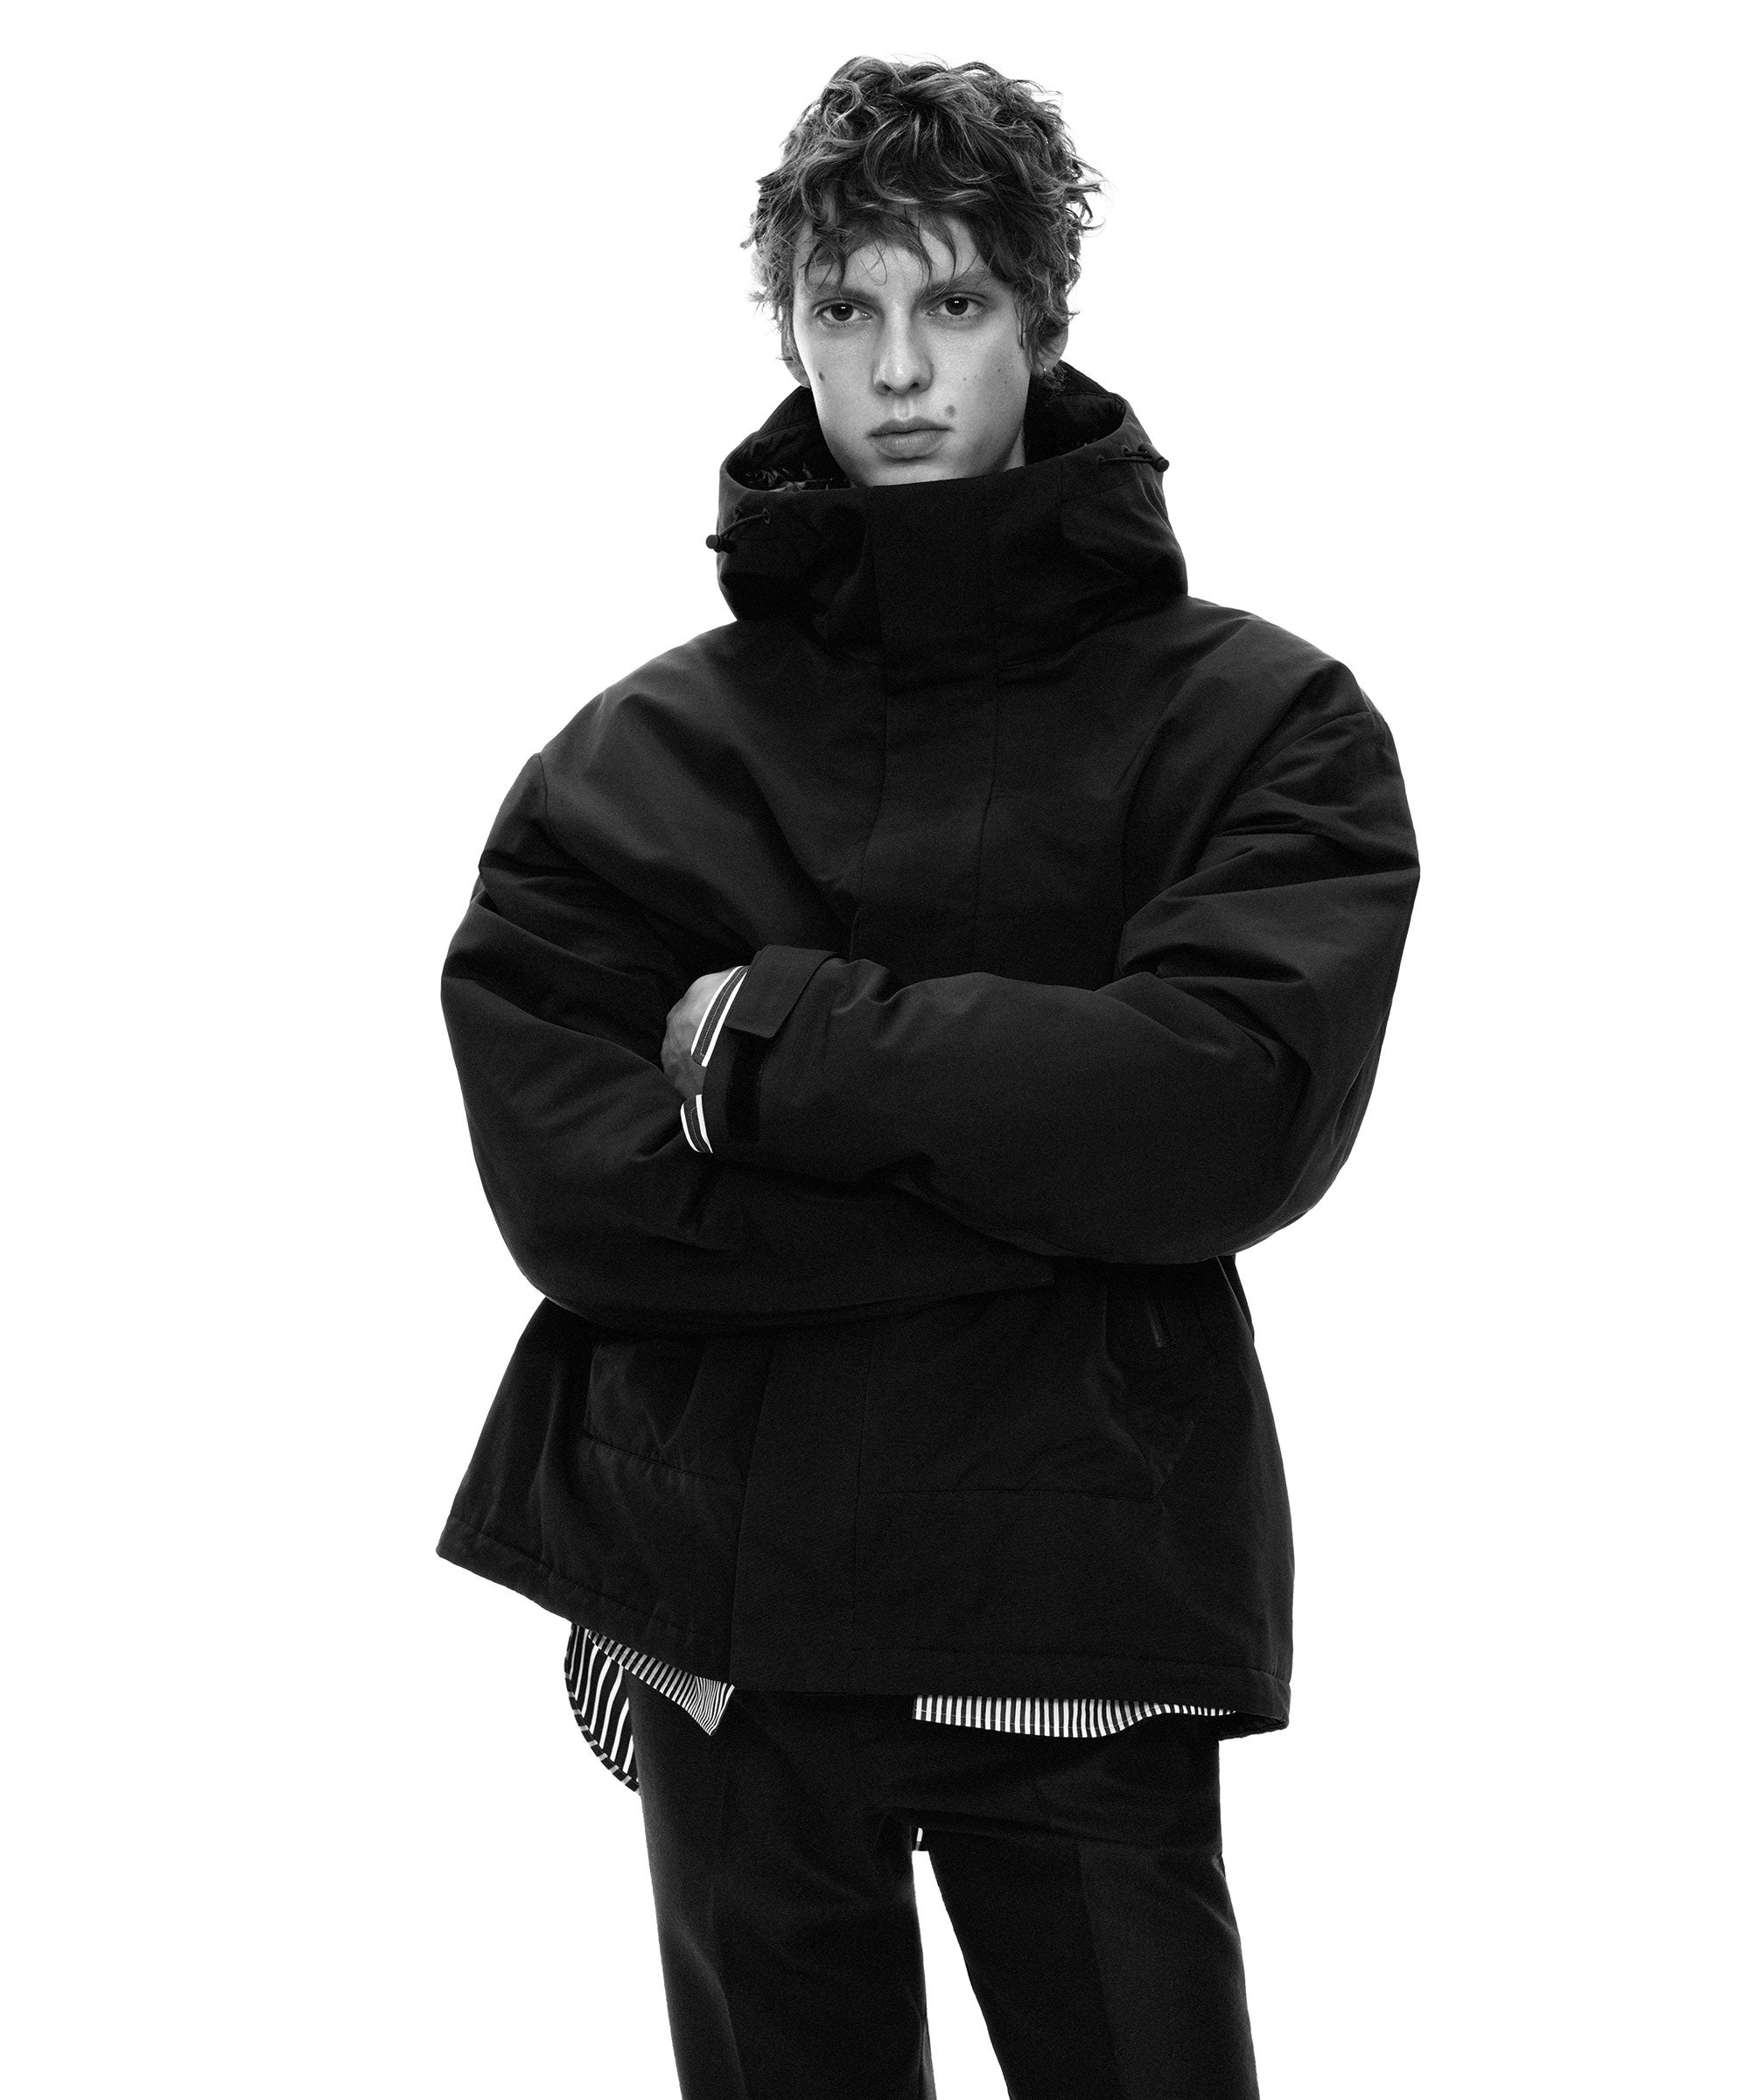 UNIQLO Brings Back Jil Sander J Collection For Fall